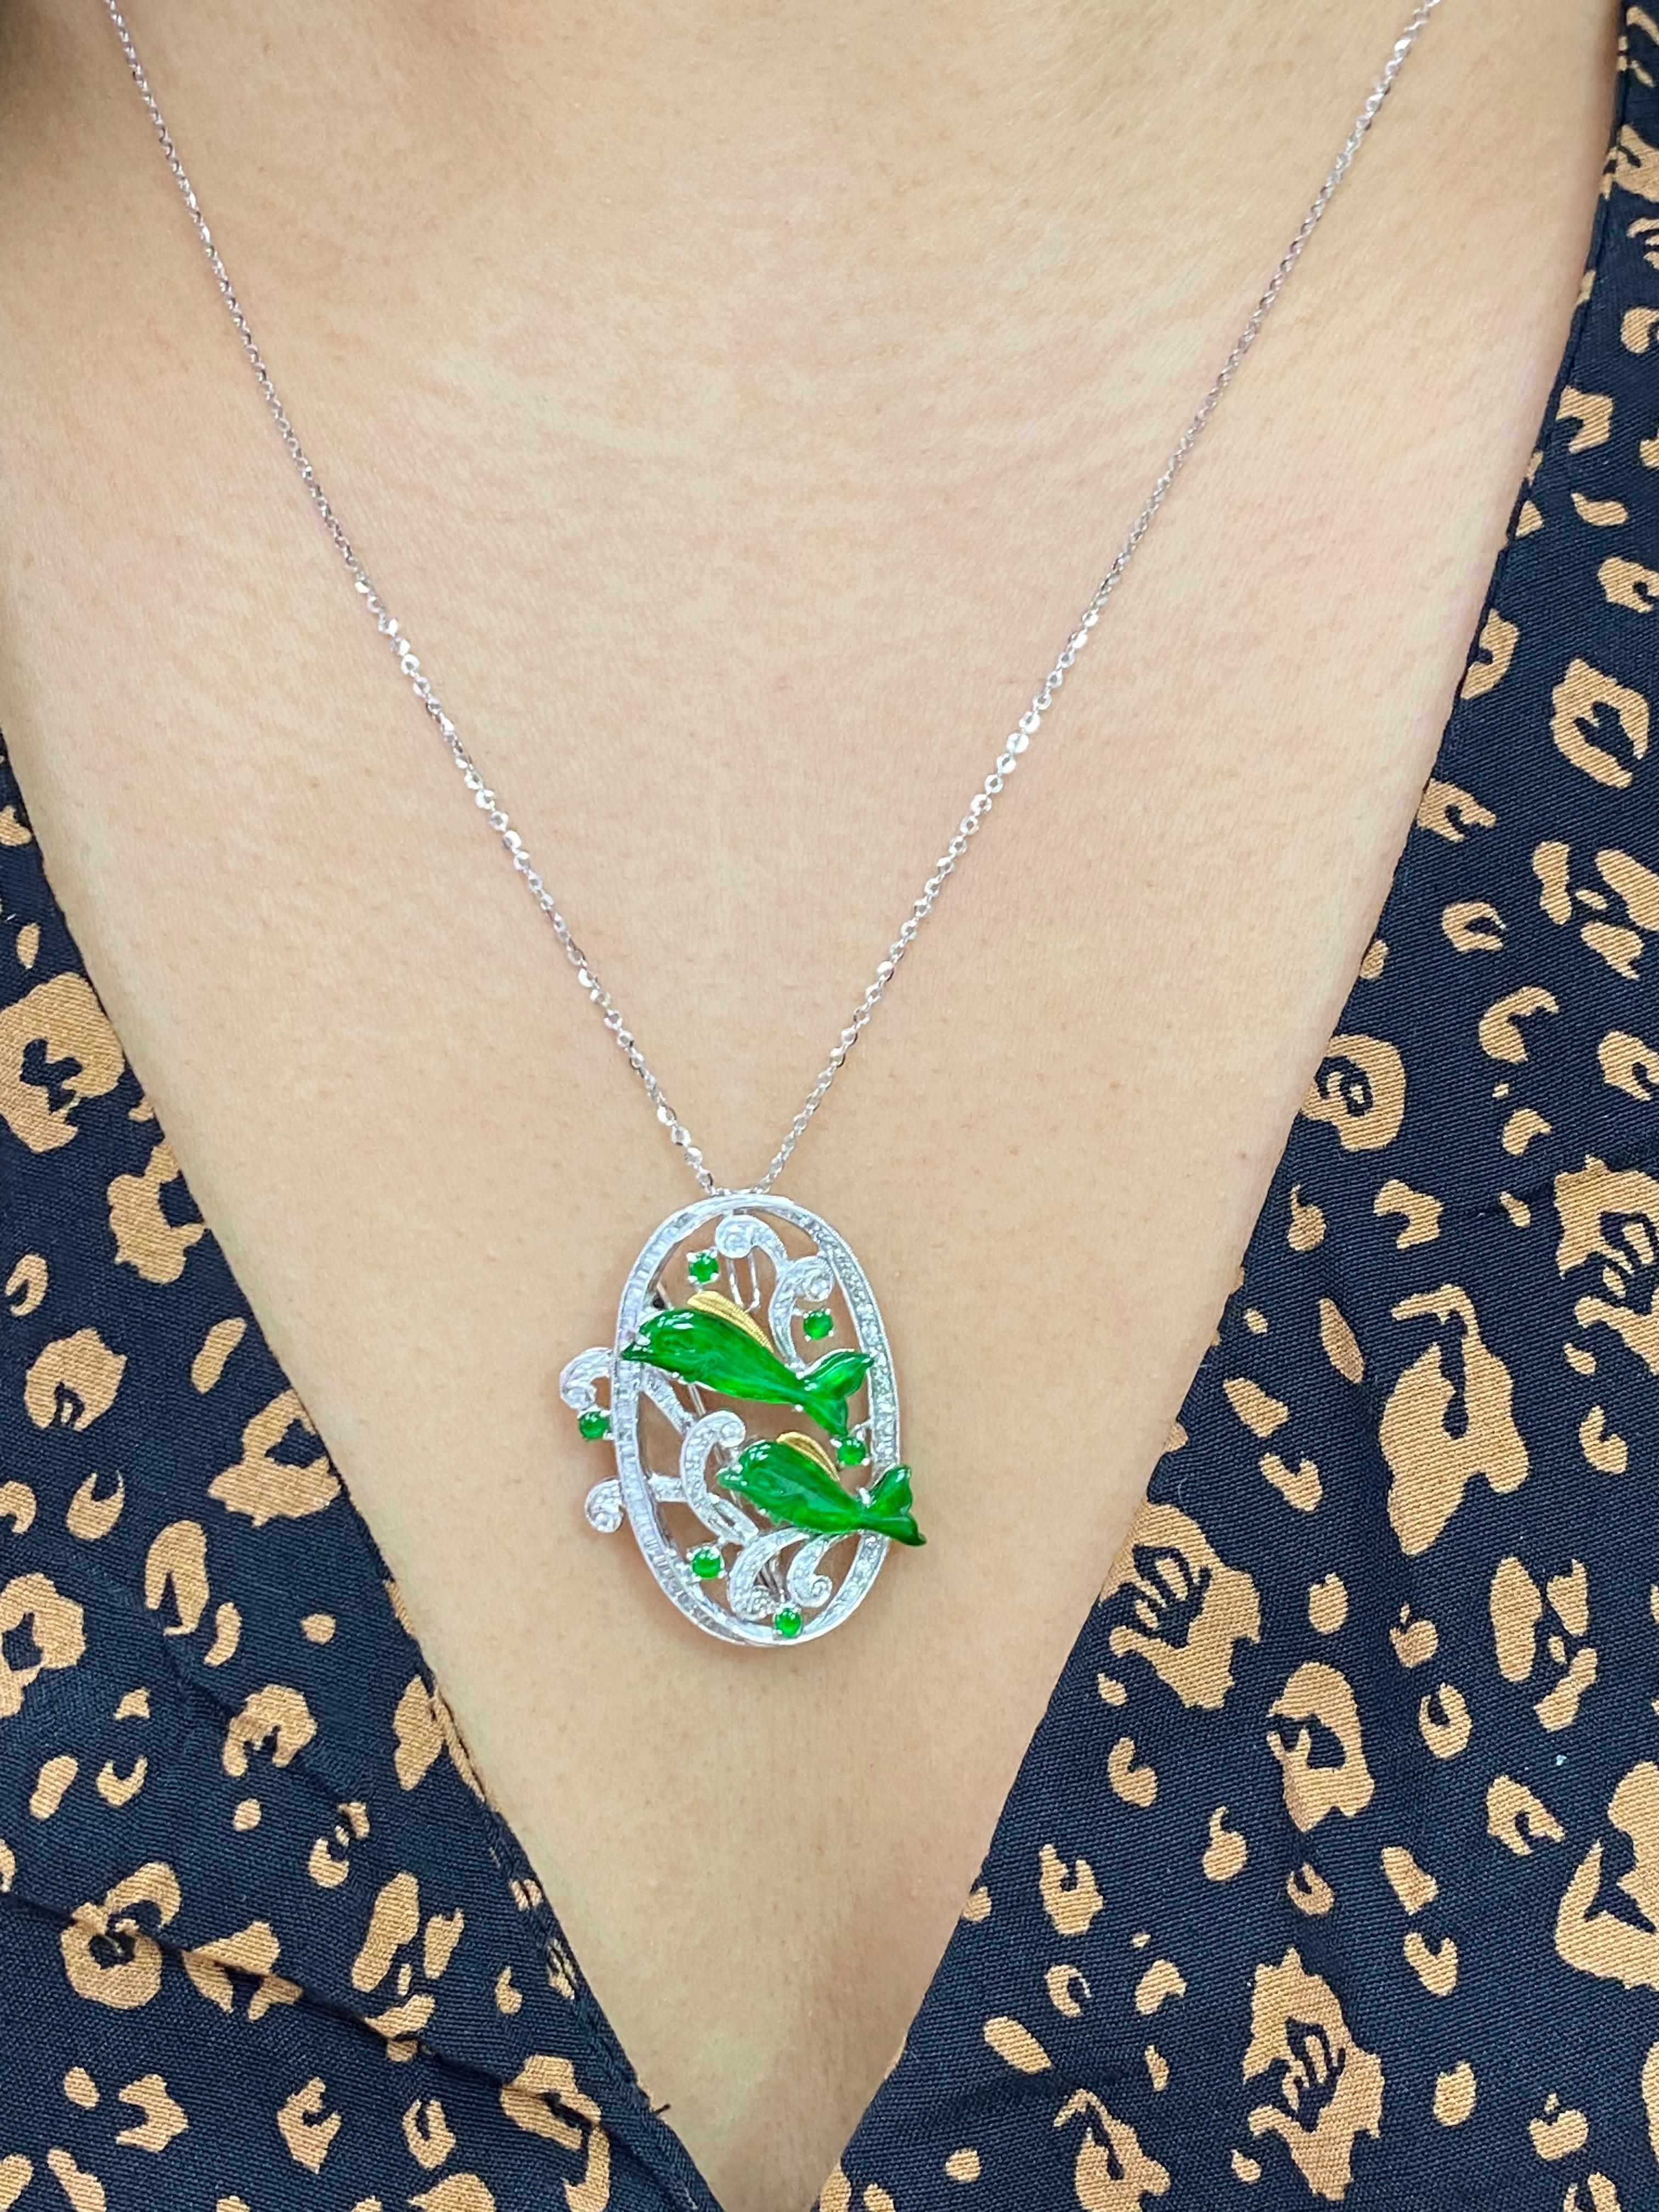 Here is a vivid apple green Jade and diamond pendant / brooch. The pendant / brooch is set in 18k white gold and diamonds. The Jade is certified. This jade dolphins has a nice vivid green color that you will never forget. It actually glows. There